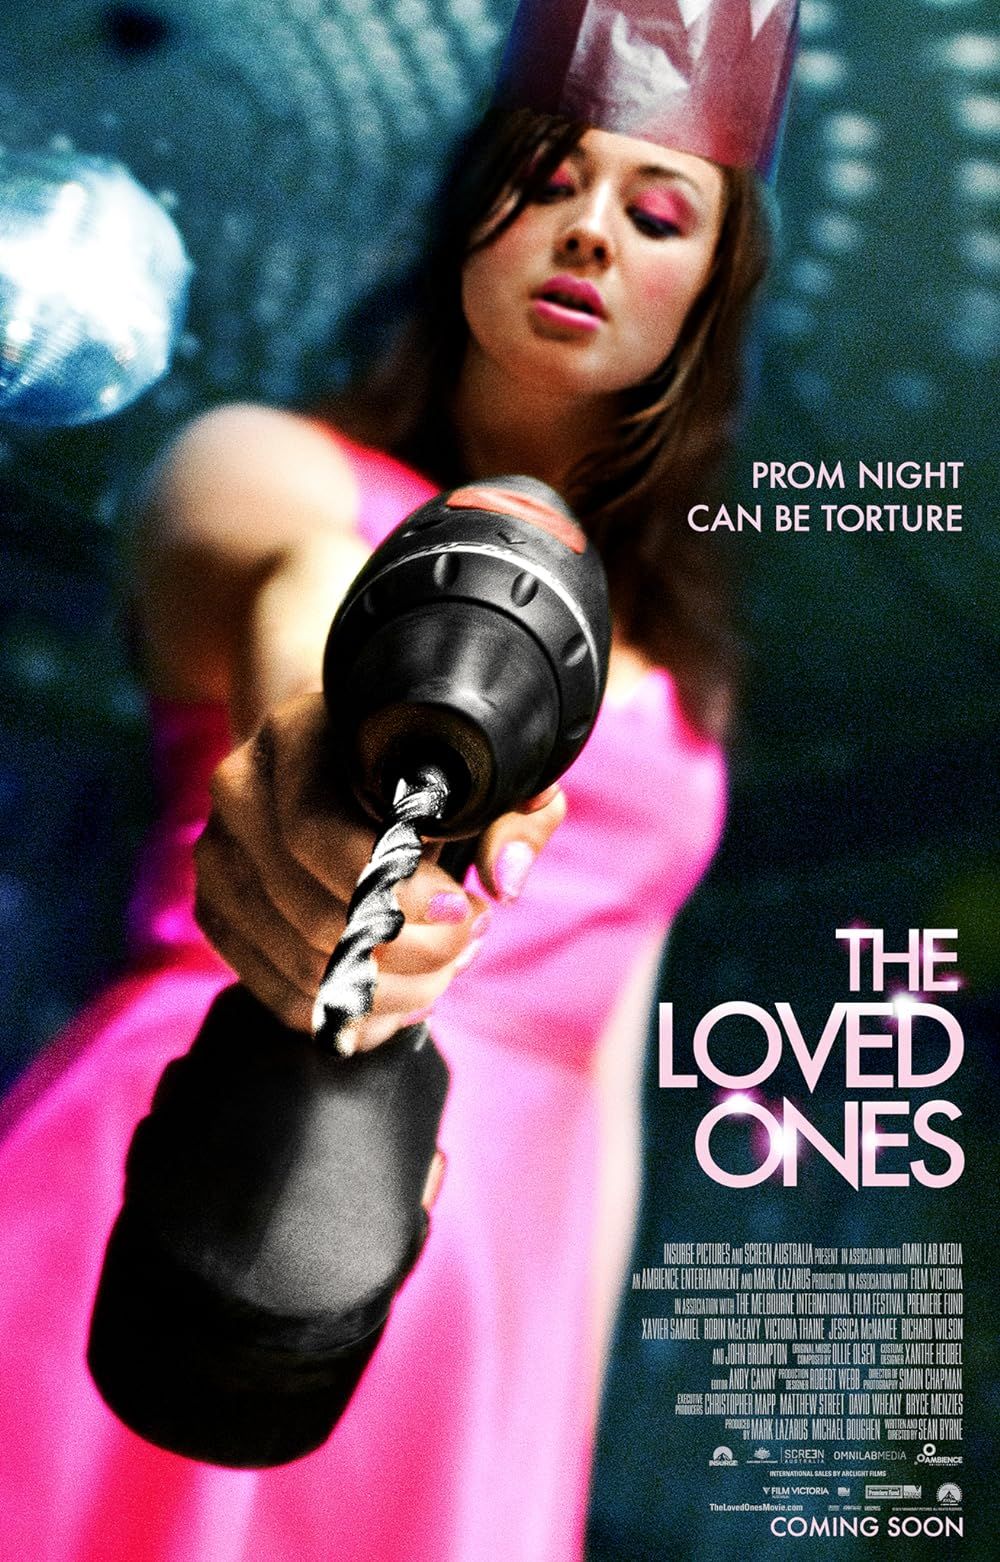 Lola aiming a drill on the cover of The Loved Ones